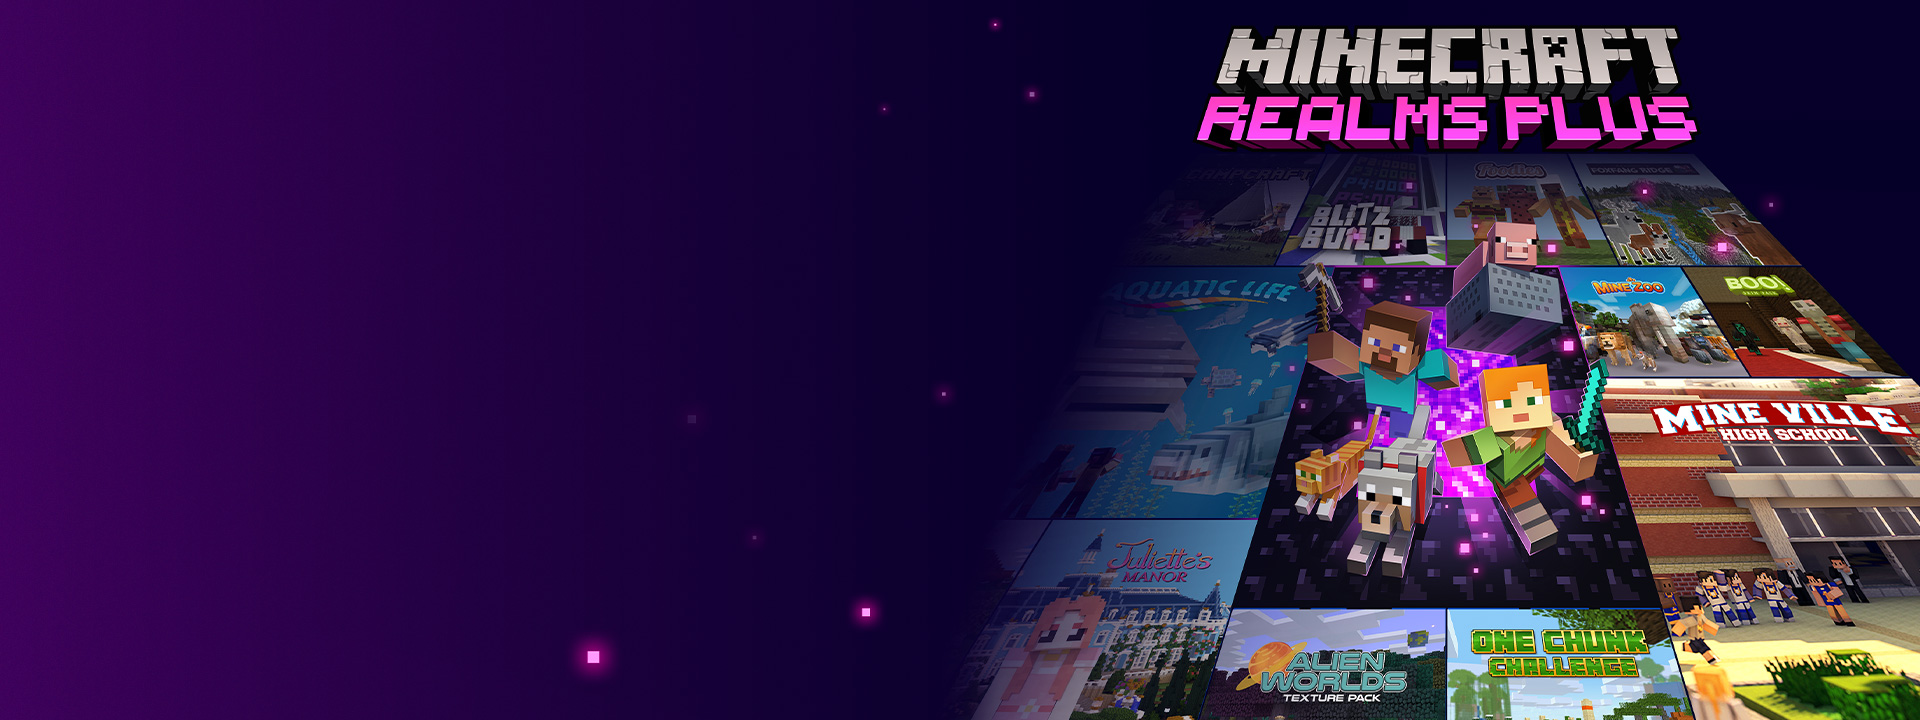 Minecraft Realms Plus, Minecraft characters coming out of a Nether portal with other boxshots beside it